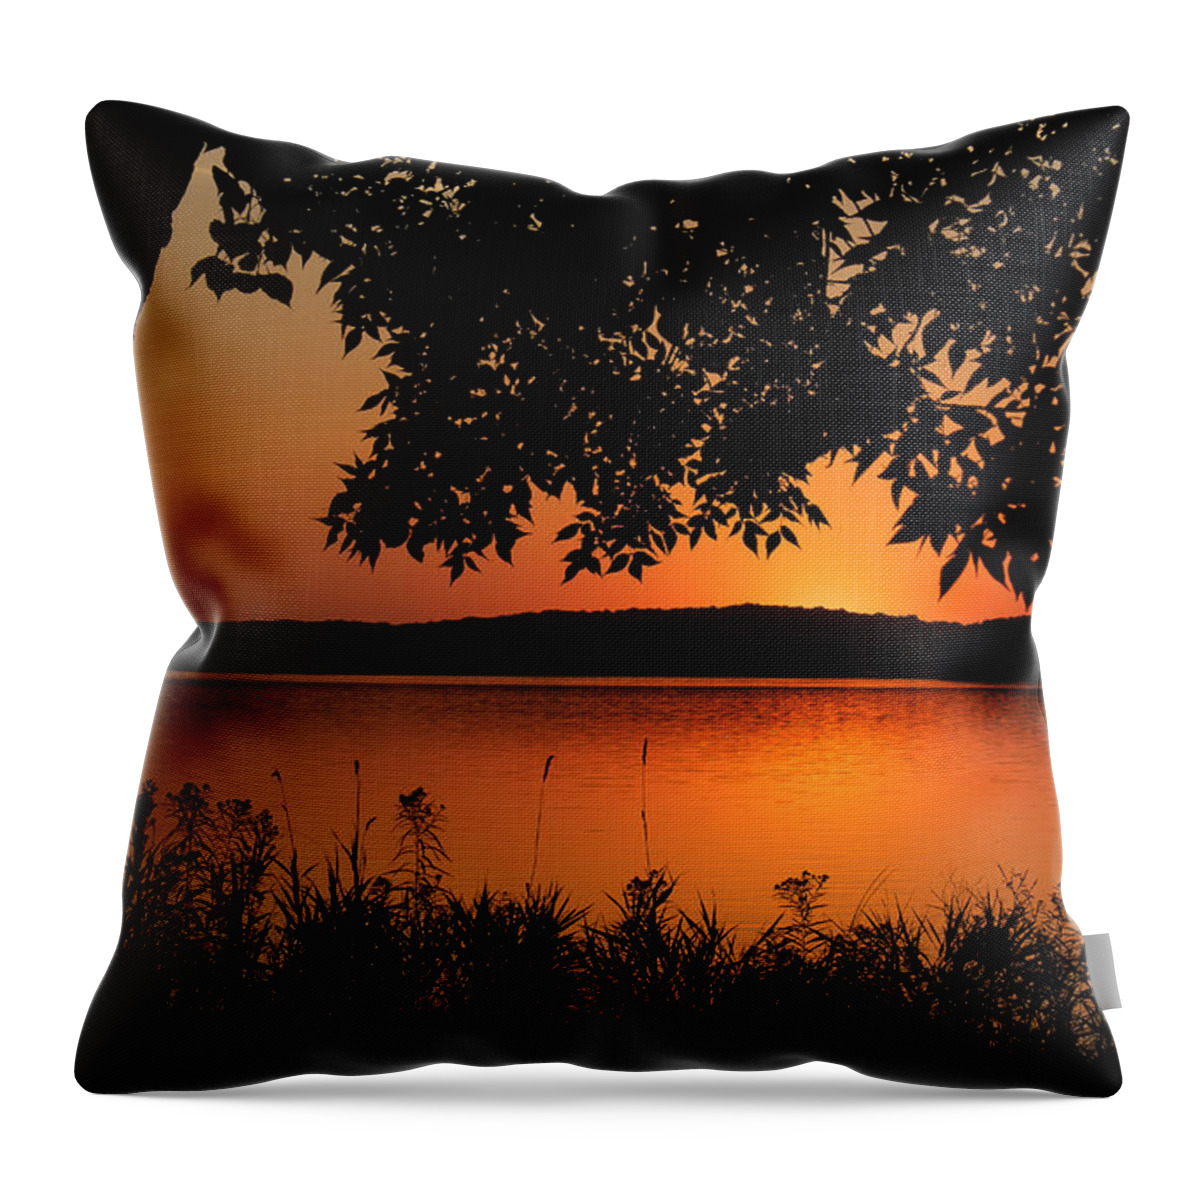 Sunset Throw Pillow featuring the photograph Silent Silhouettes by Penny Meyers